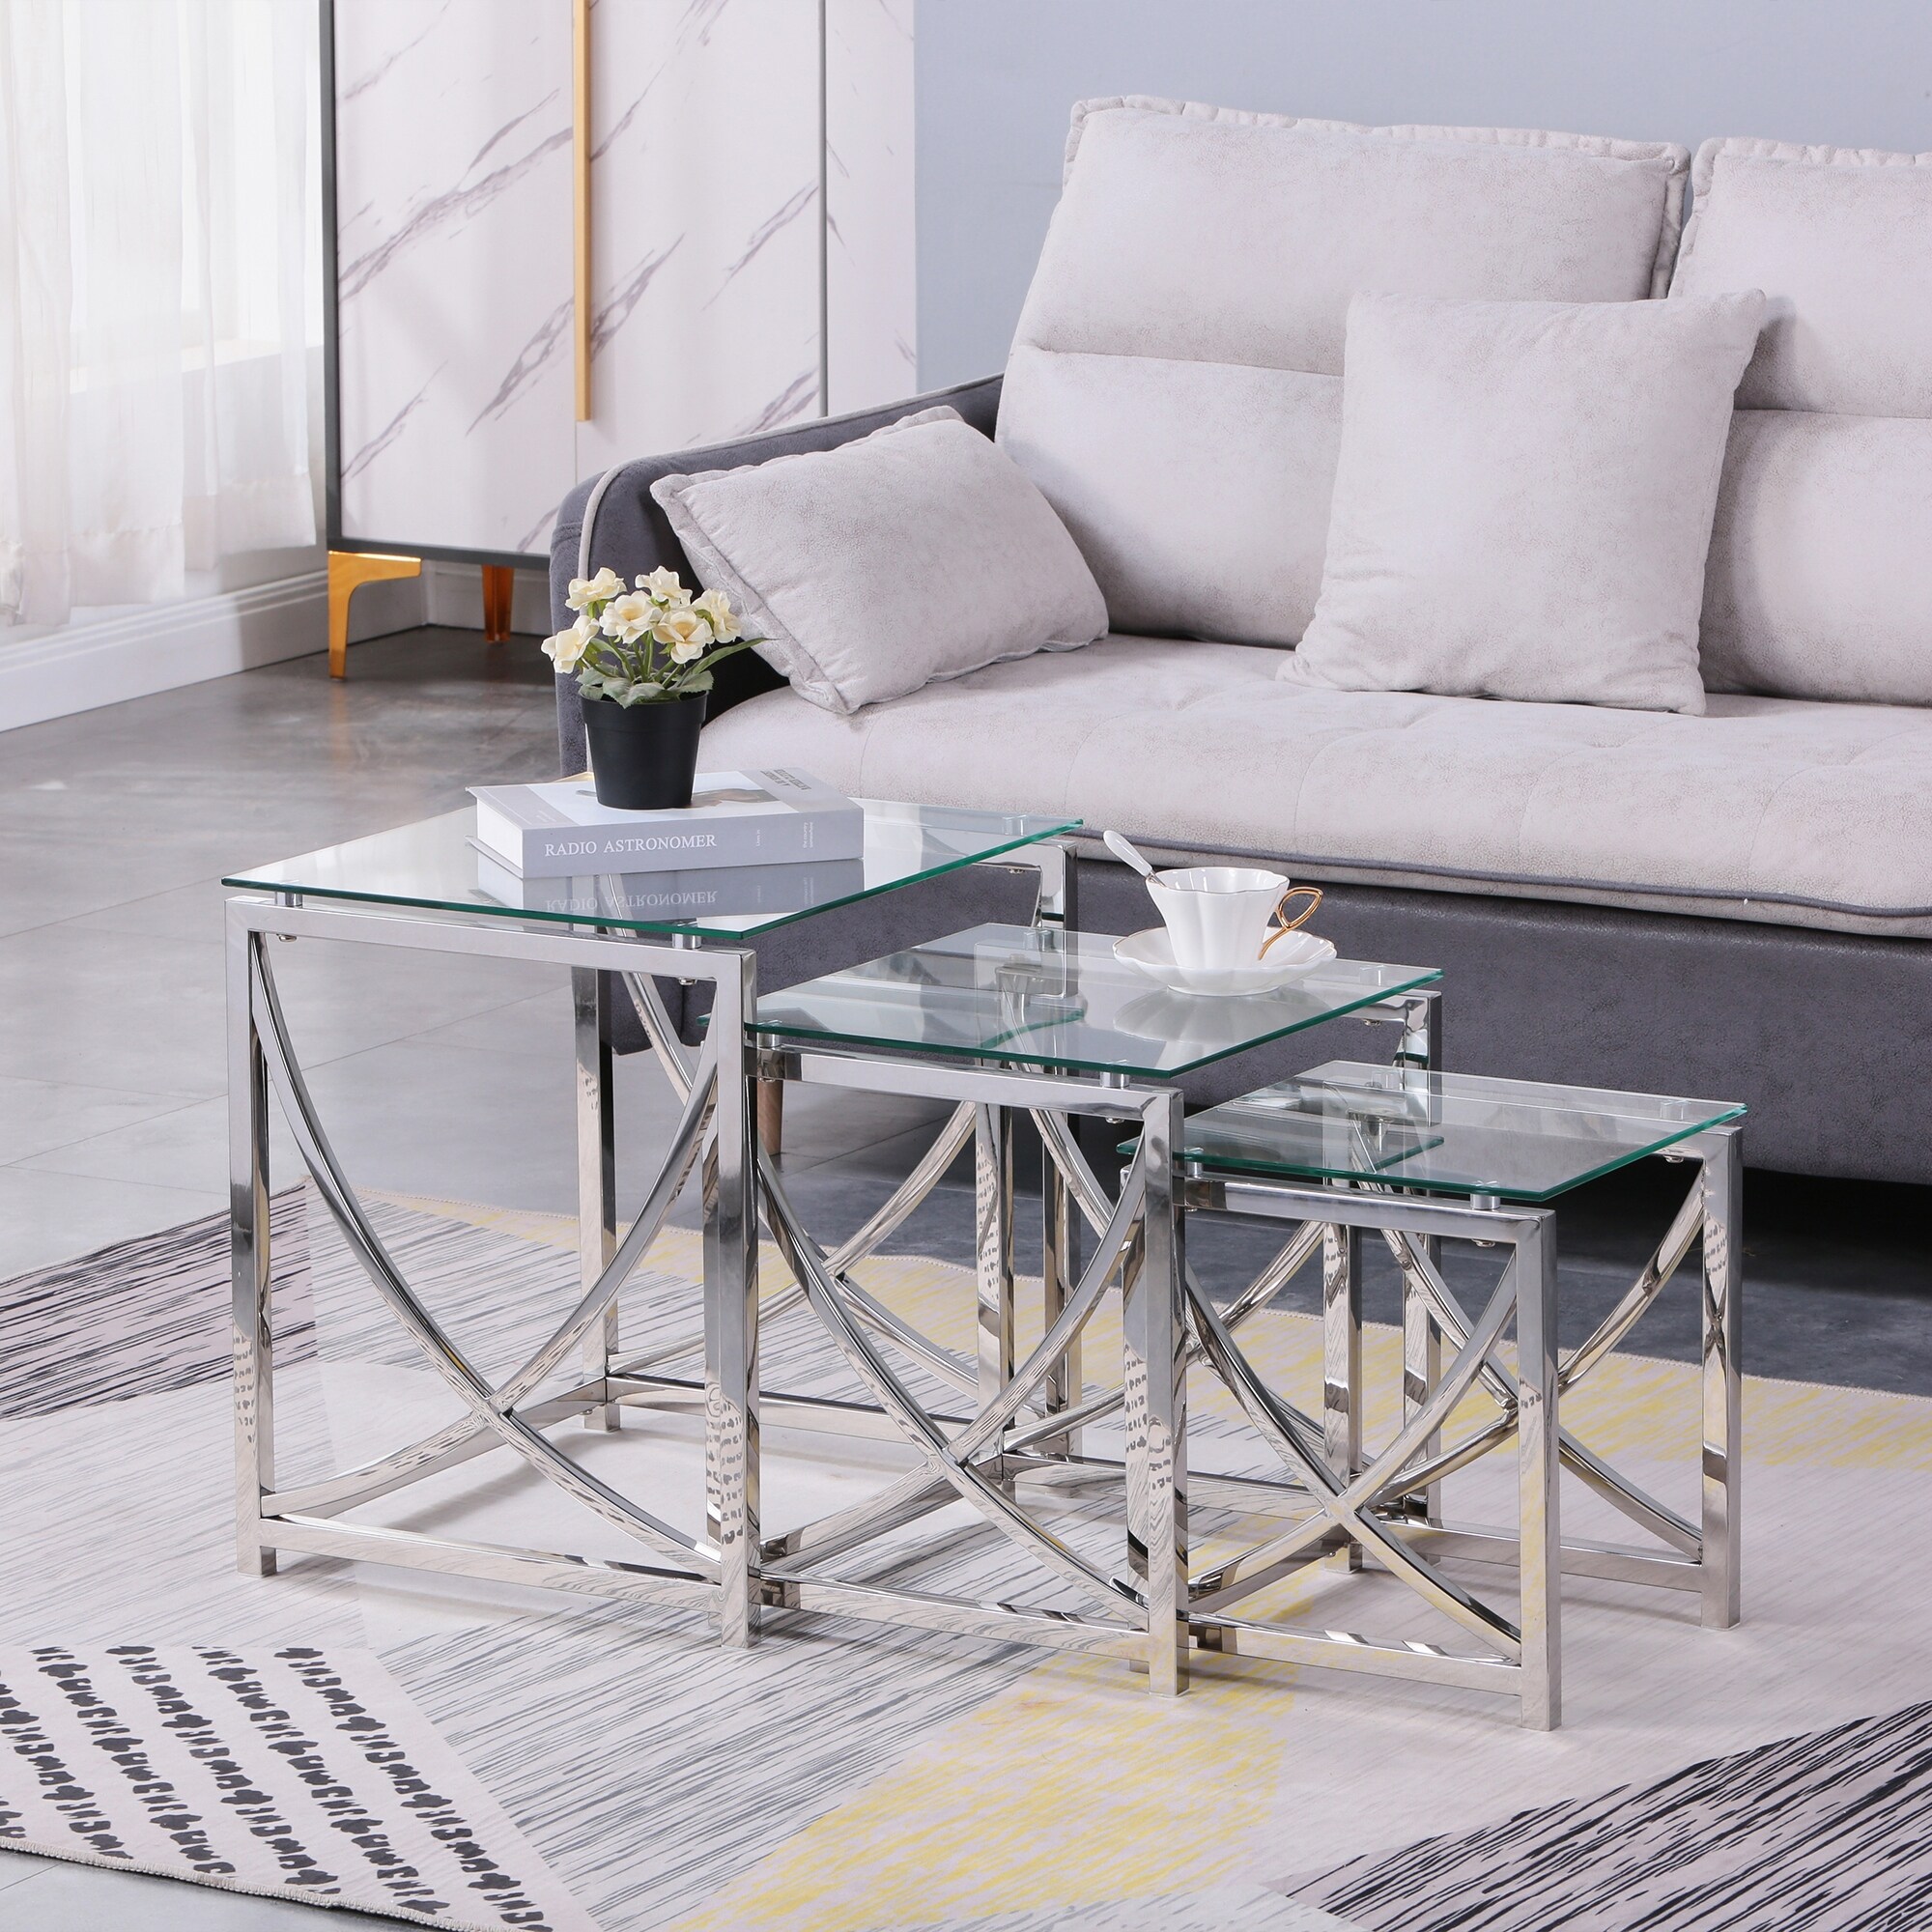 BESTCOSTY Silver Square Nesting Glass End Tables-Set of 3